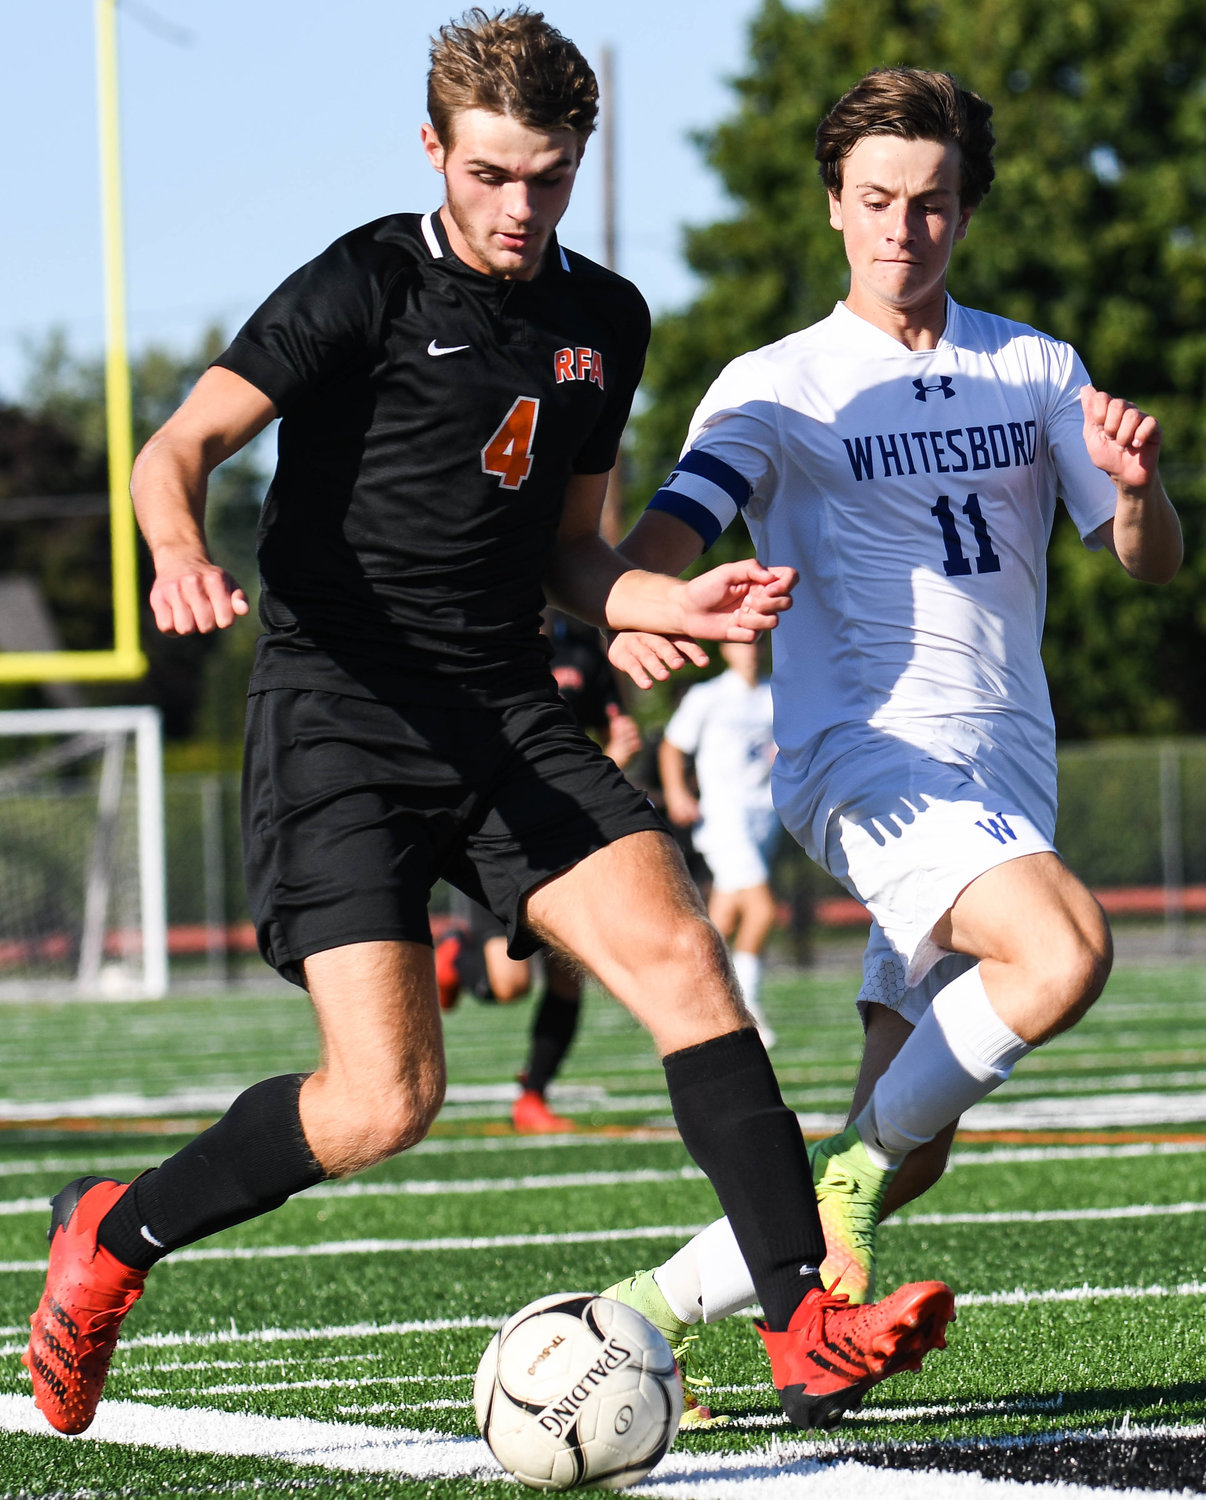 Rome Free Academy forward Gavin Civitelli, left, moves the ball as Whitesboro's Daschel Smith defends during the game on Thursday. The Black Knights won 4-1 at home.